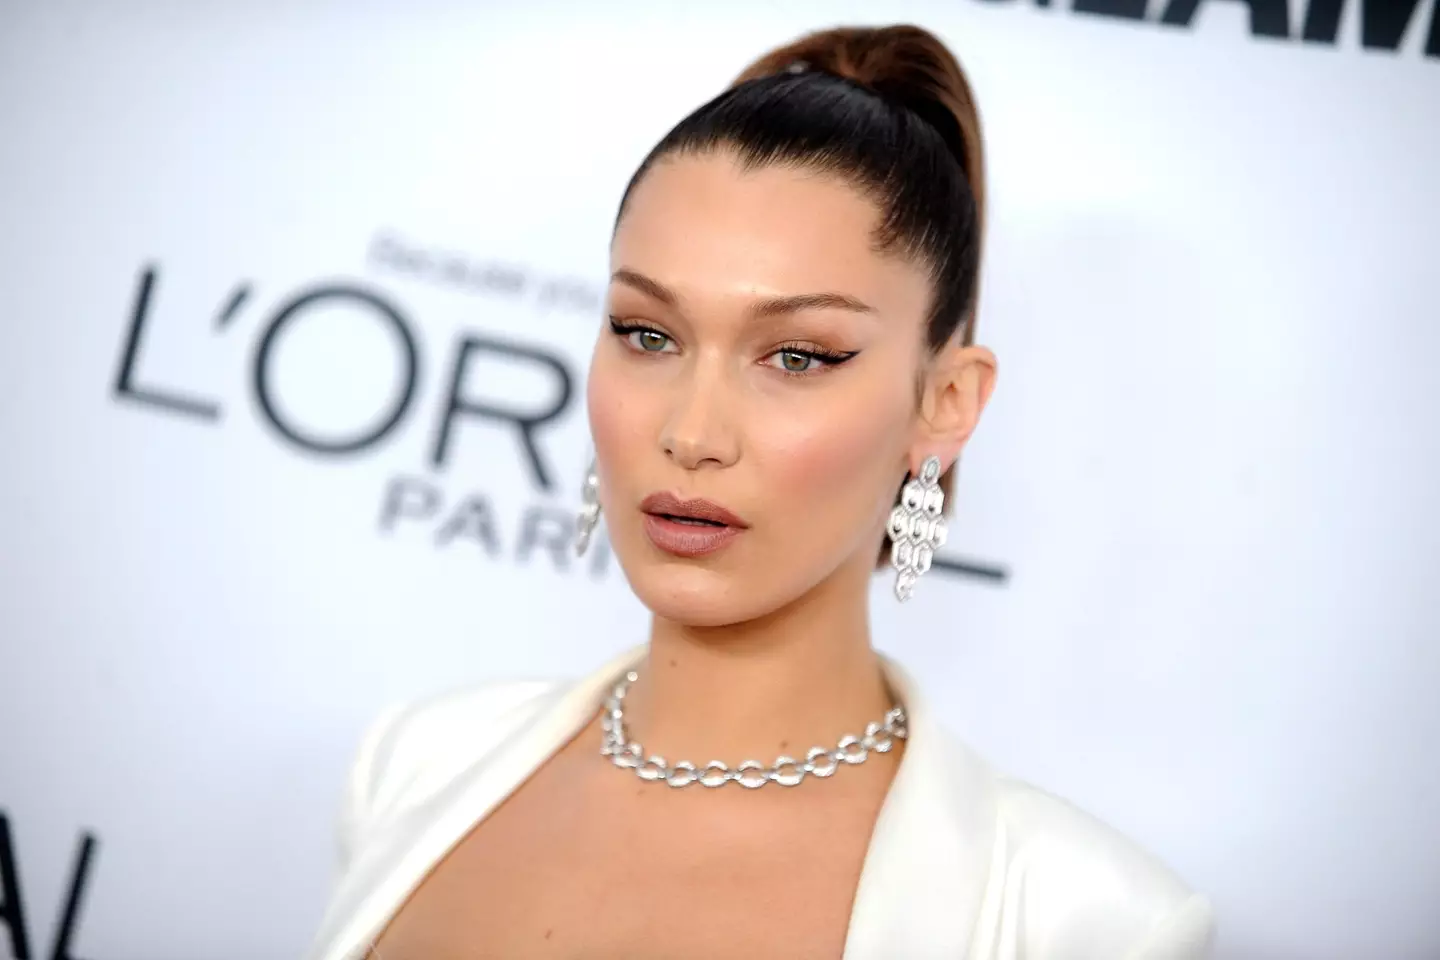 Bella Hadid is considered one of the most beautiful women in the world (